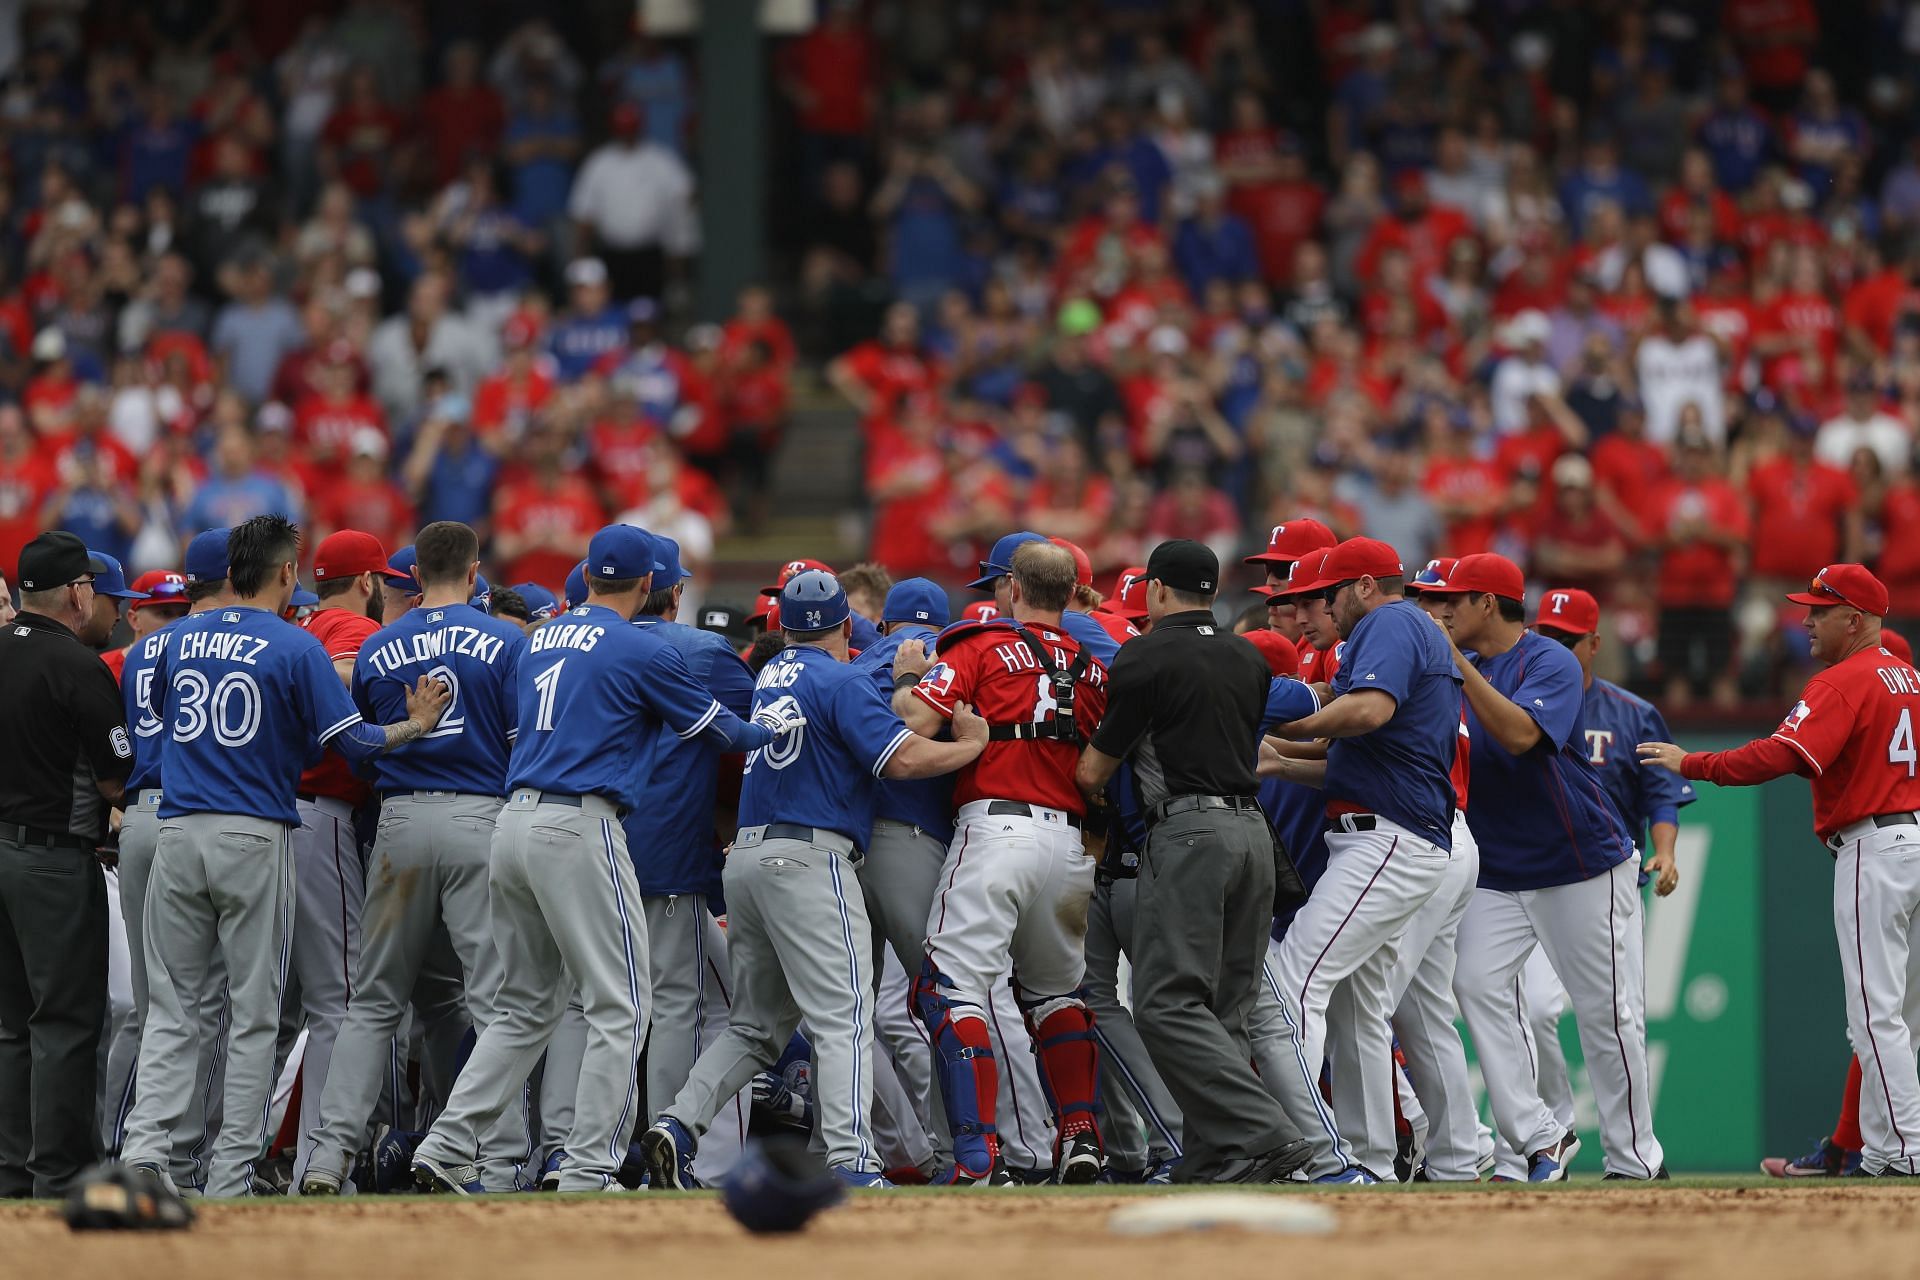 When Jose Bautista shot back after Rougned Odor clash that set off iconic  bench-clearing brawl